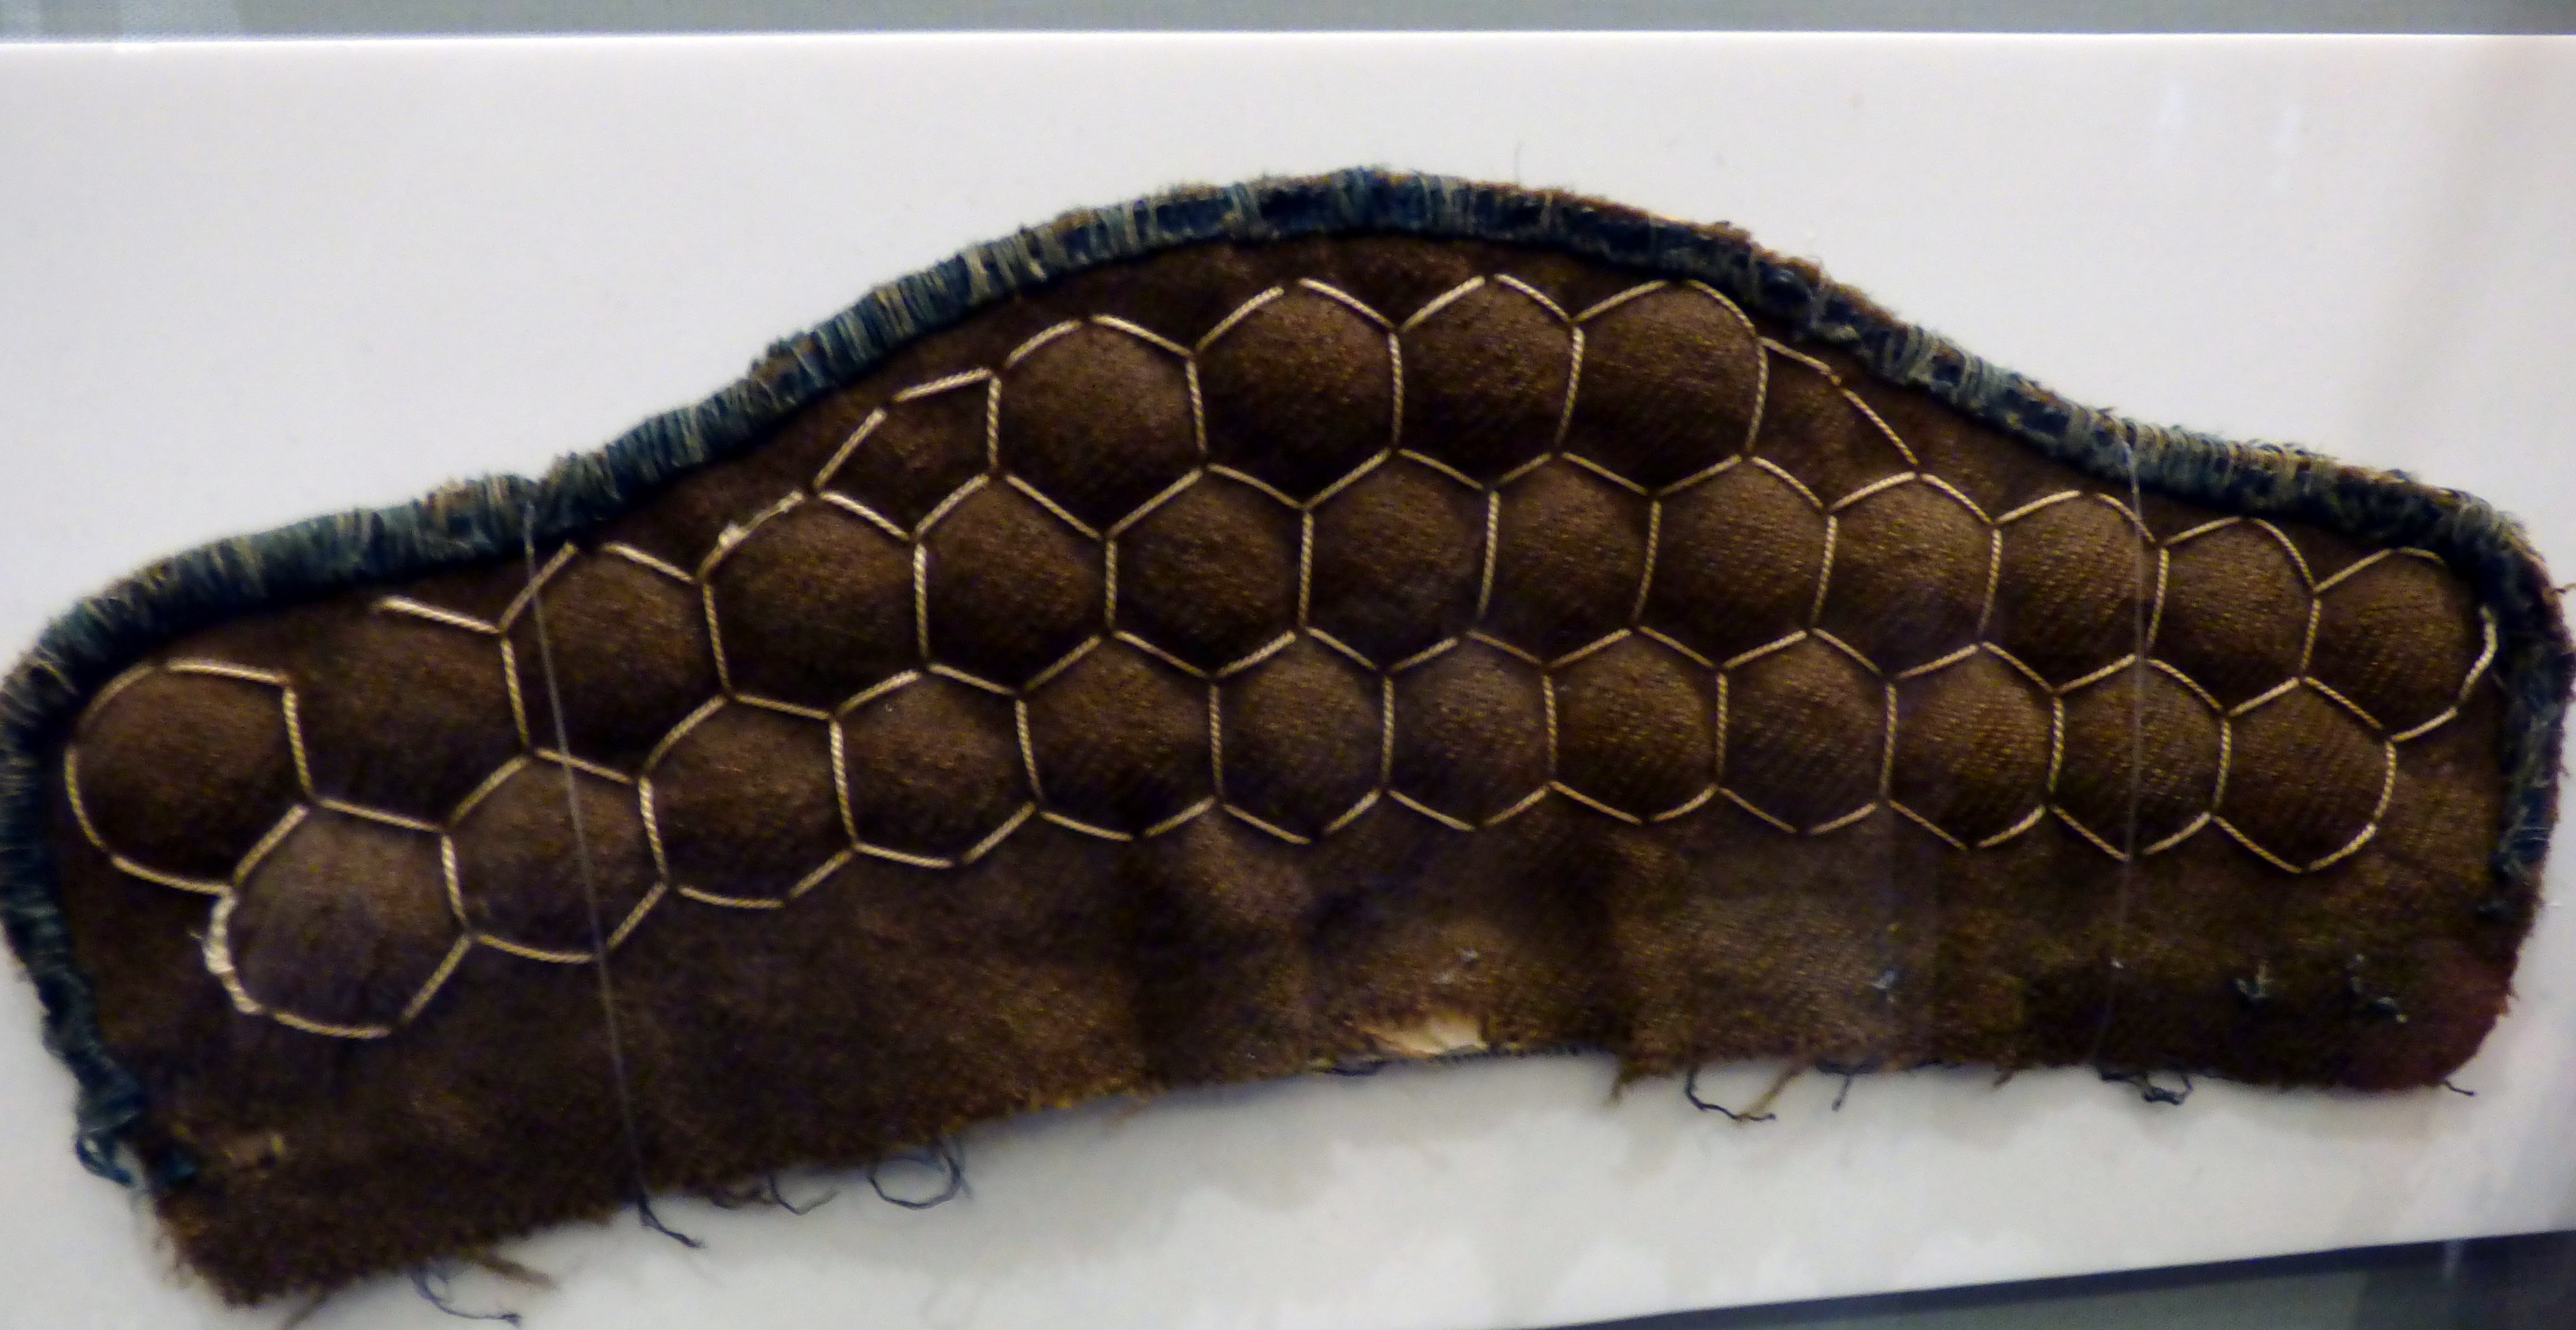 BRIGIDINE ARMOUR (KIKKO), domed hexagonal plates quilted between layers of fabric, Royal Armouries Museum, Leeds